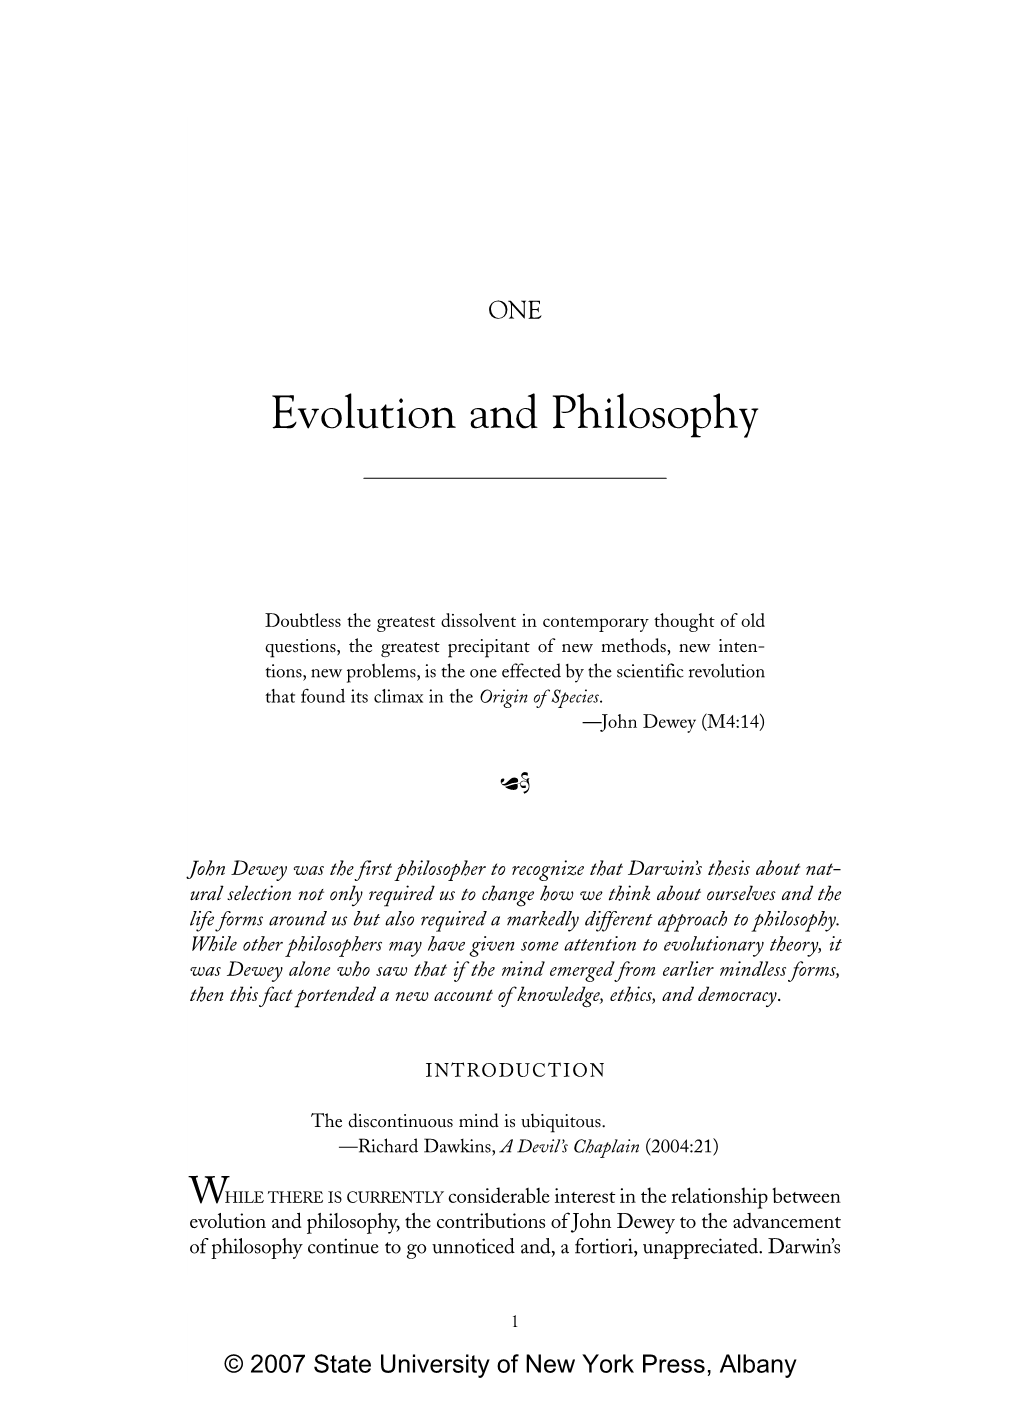 Evolution and Philosophy